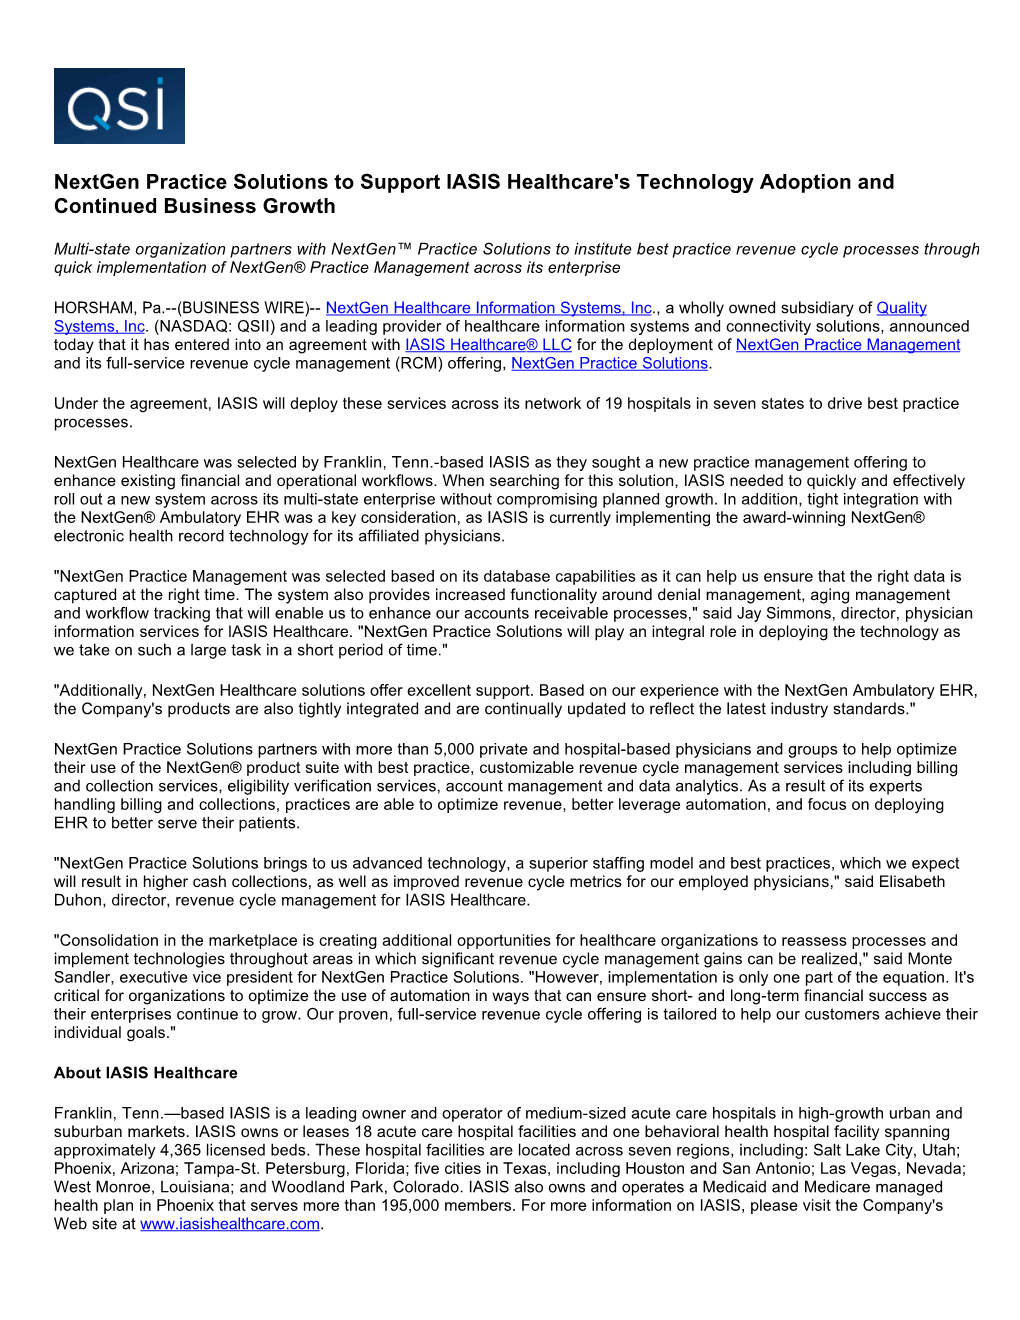 Nextgen Practice Solutions to Support IASIS Healthcare's Technology Adoption and Continued Business Growth